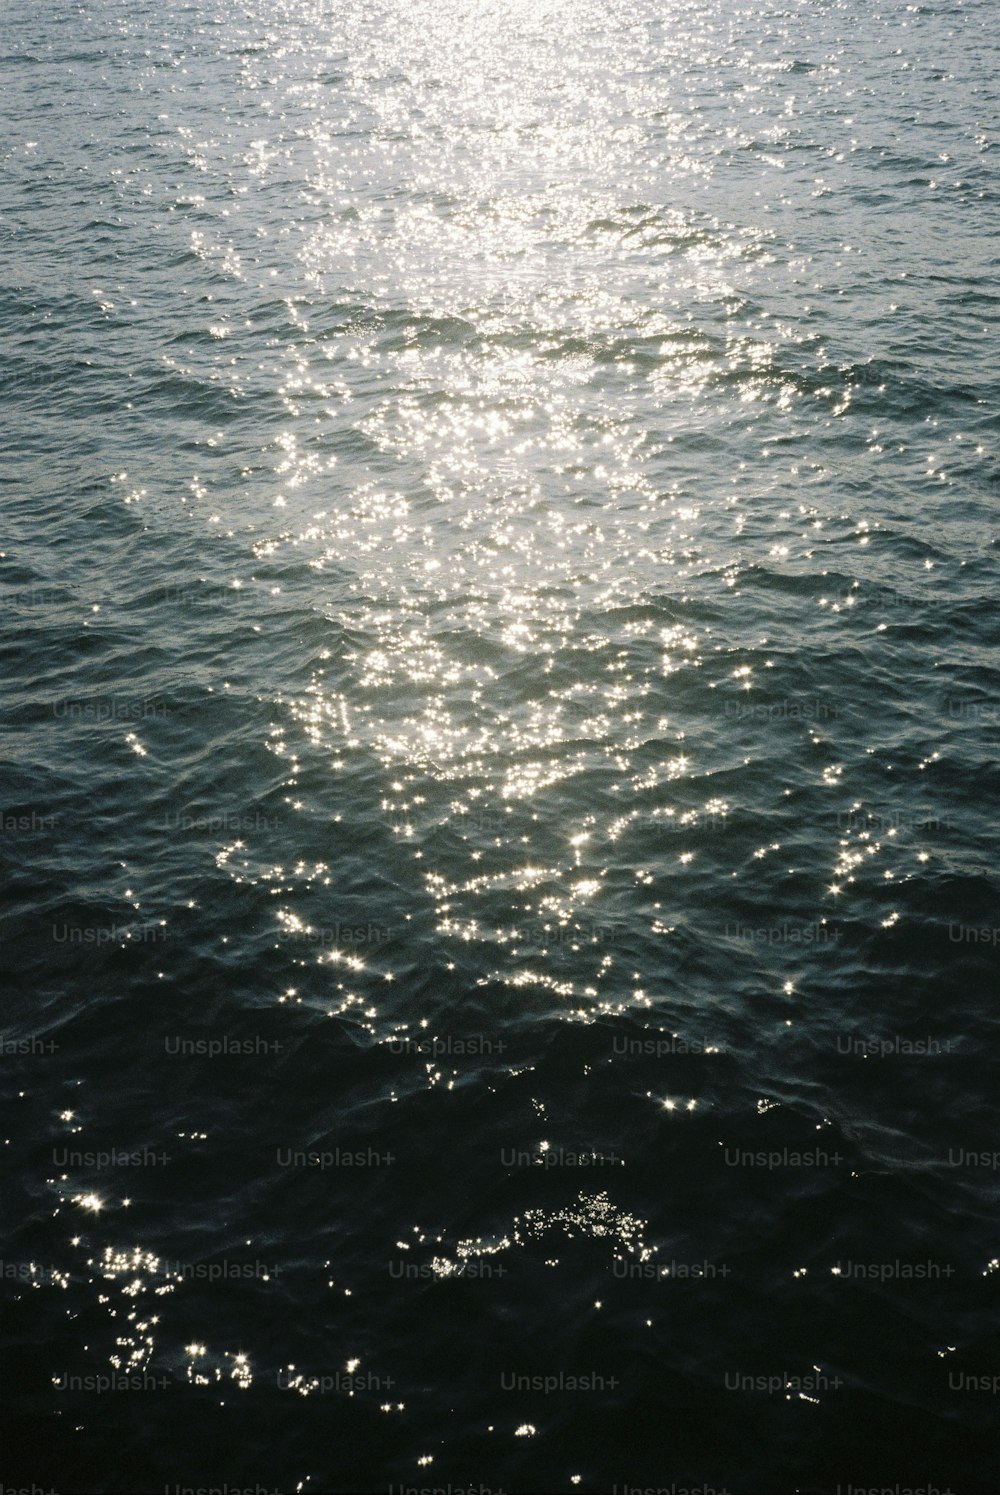 the sun shines brightly on the water